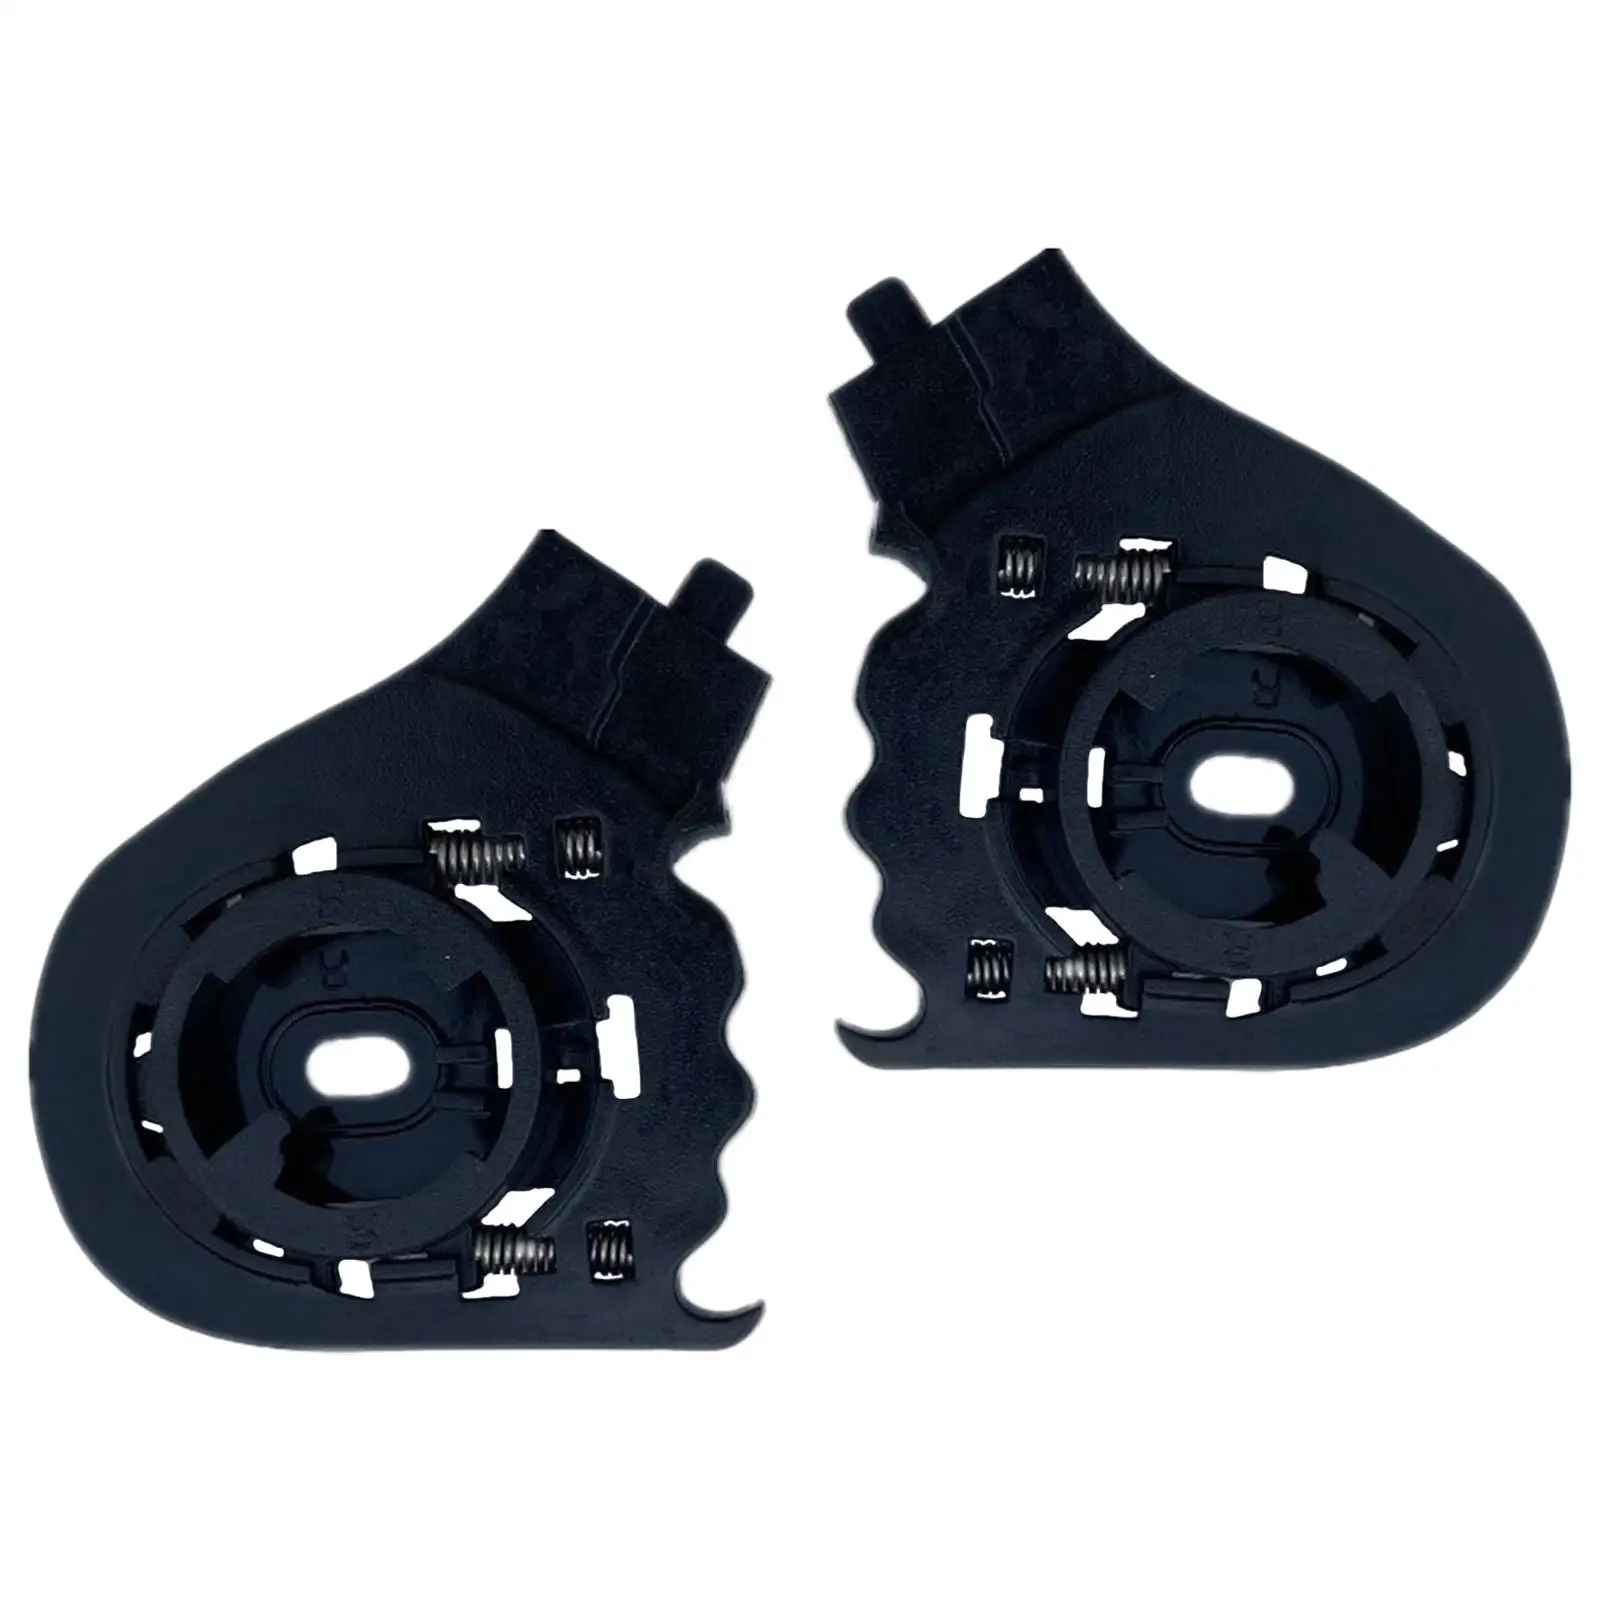 2x Motorcycle, Replacement Side Plate Helmets for of569